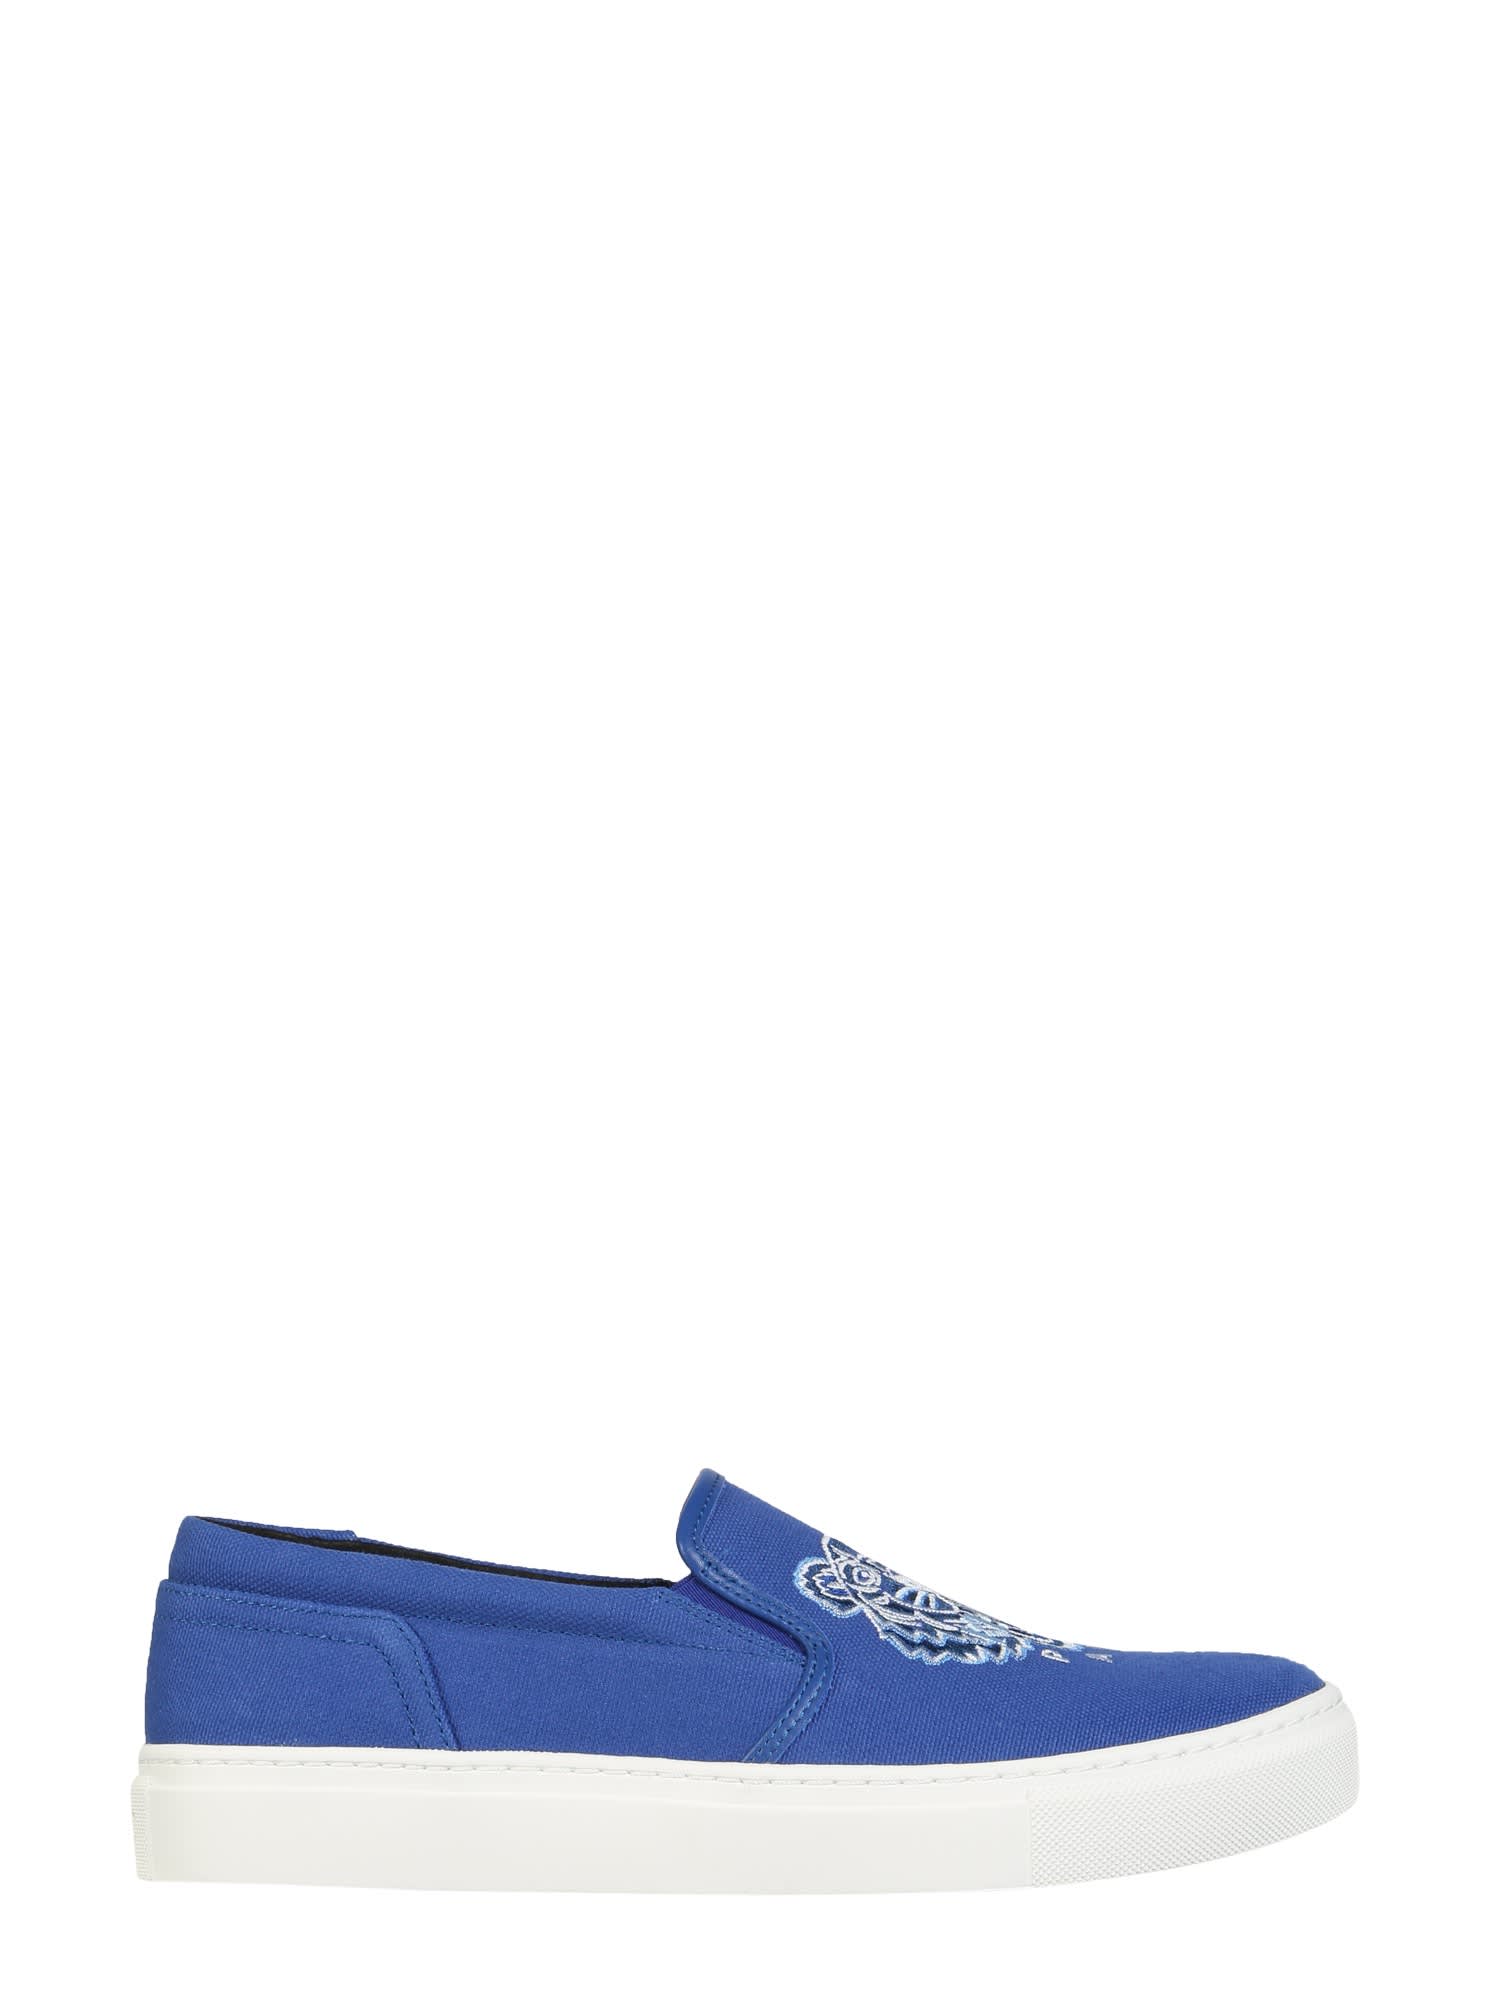 Buy Kenzo K-skate Slip-on Sneakers online, shop Kenzo shoes with free shipping